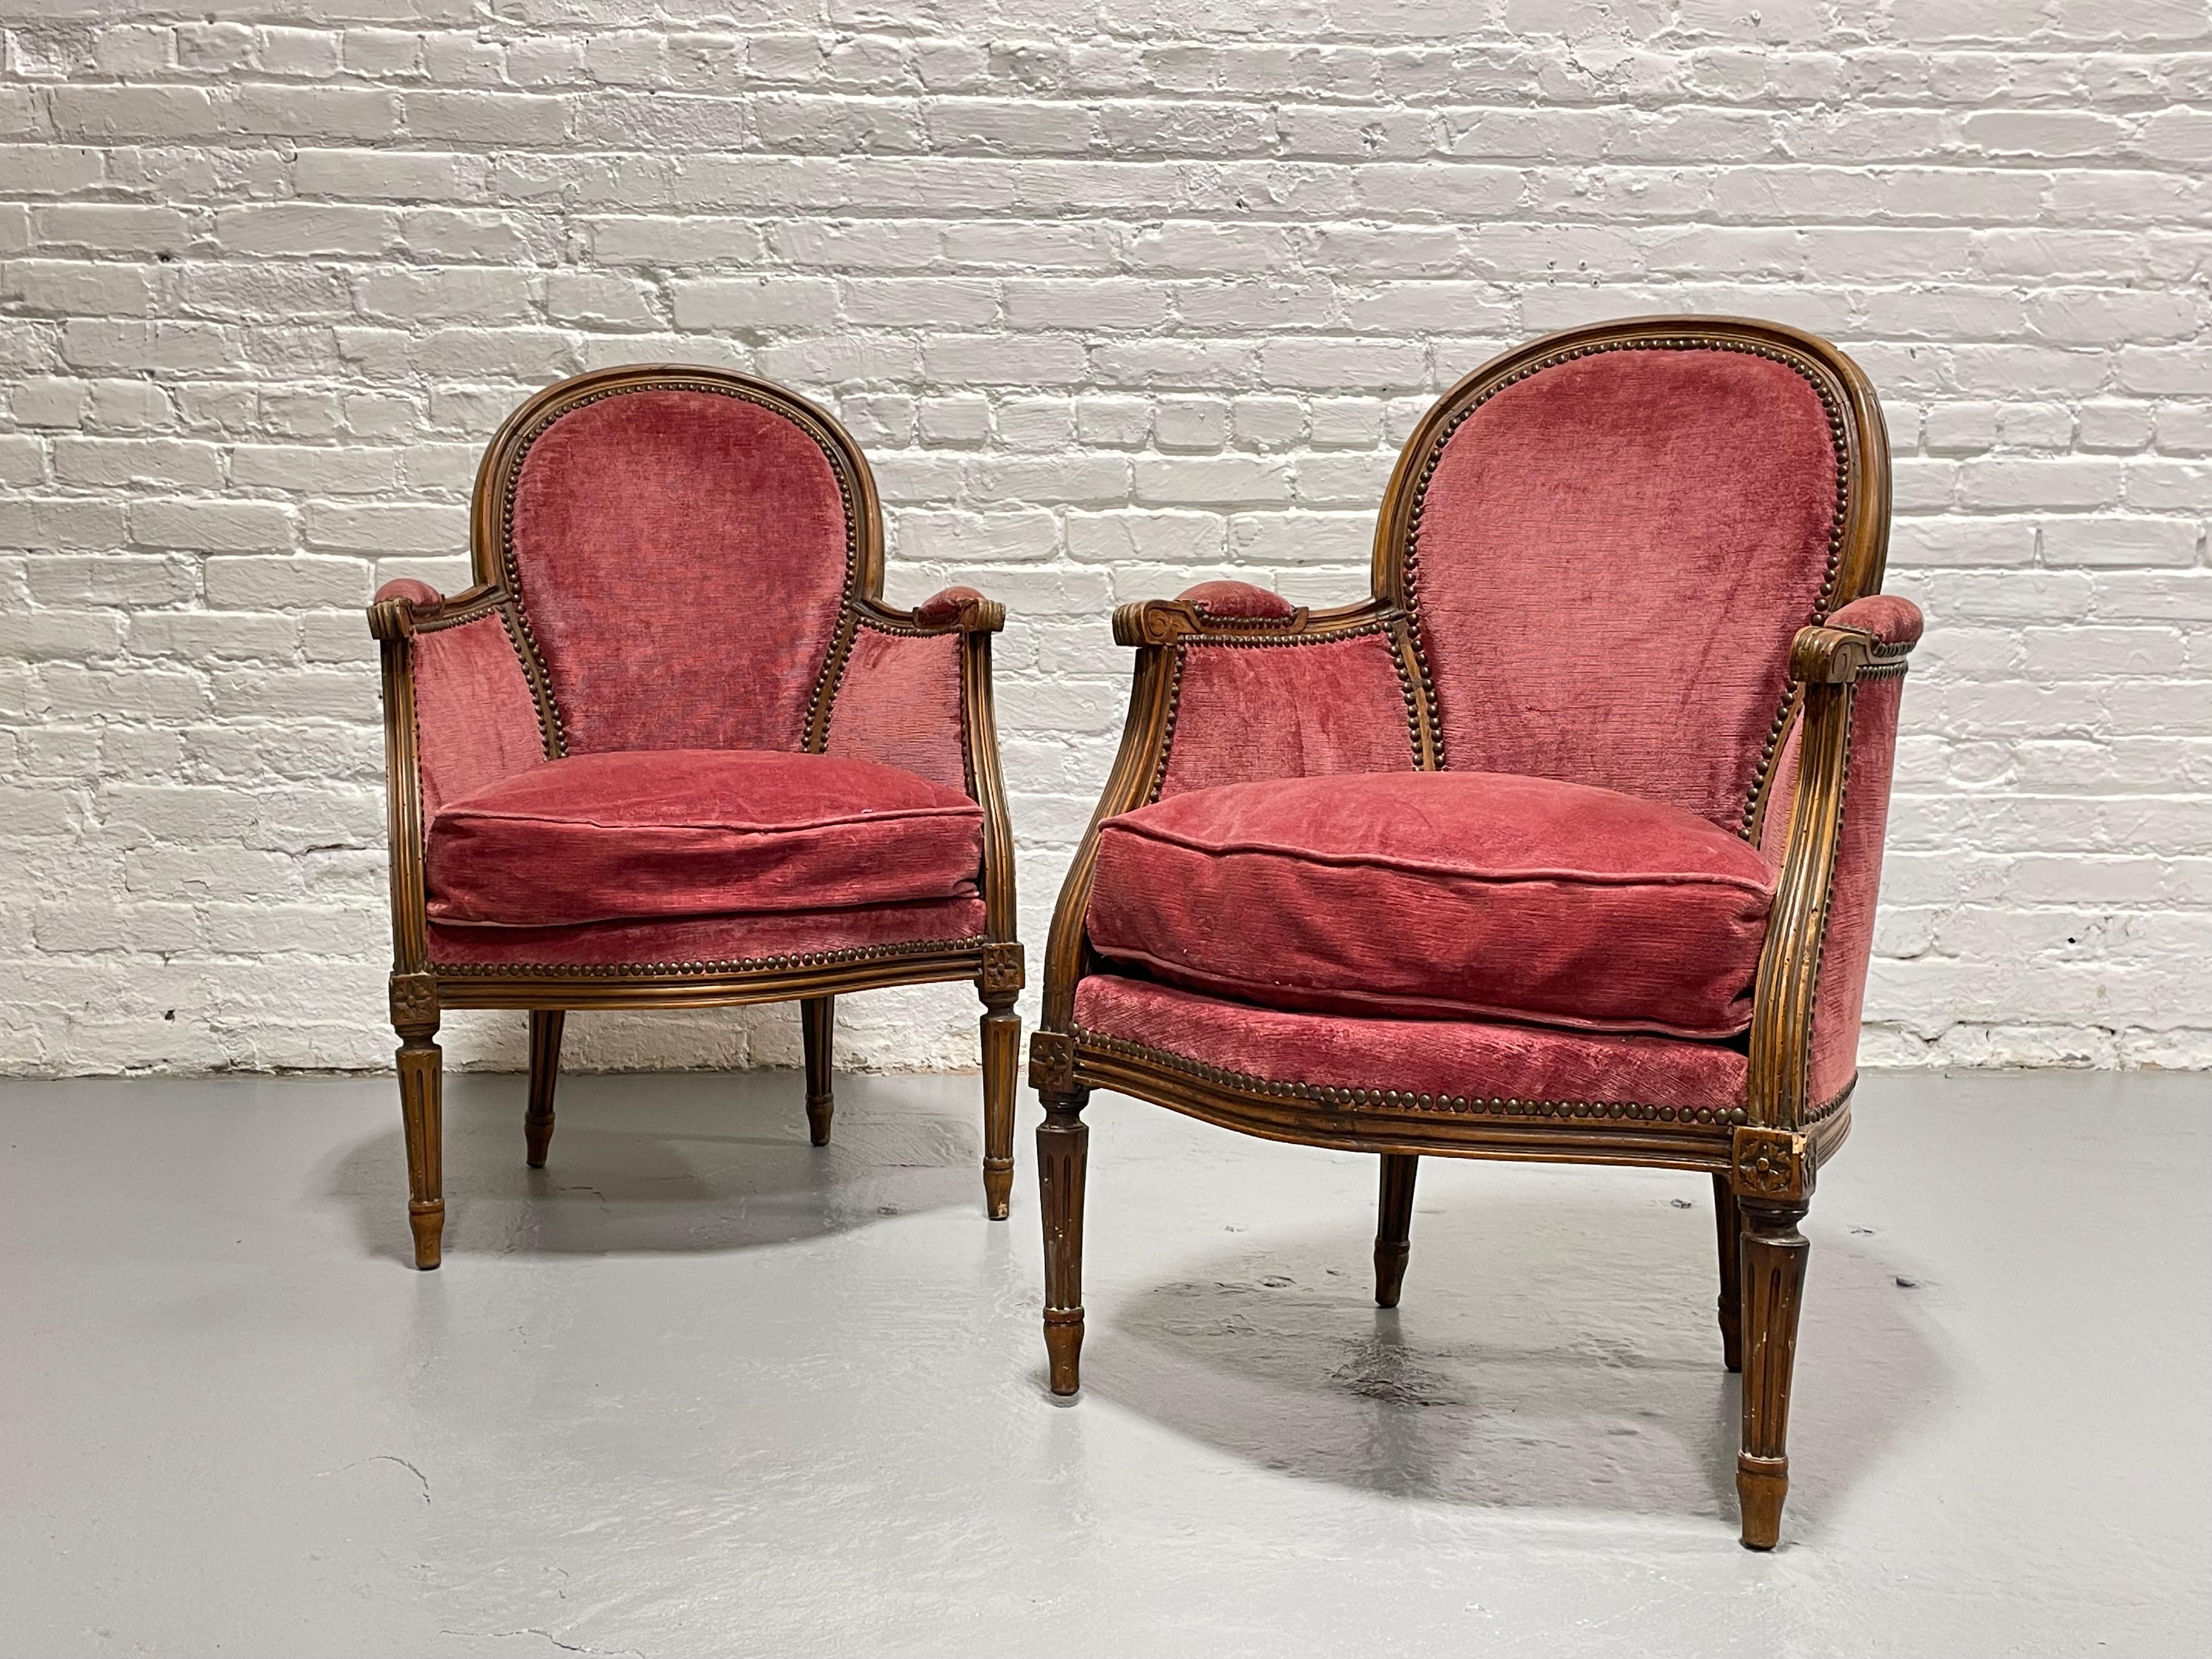 Pair of Louis XVI French Bergere Armchairs, c. 1940 In Good Condition For Sale In Weehawken, NJ